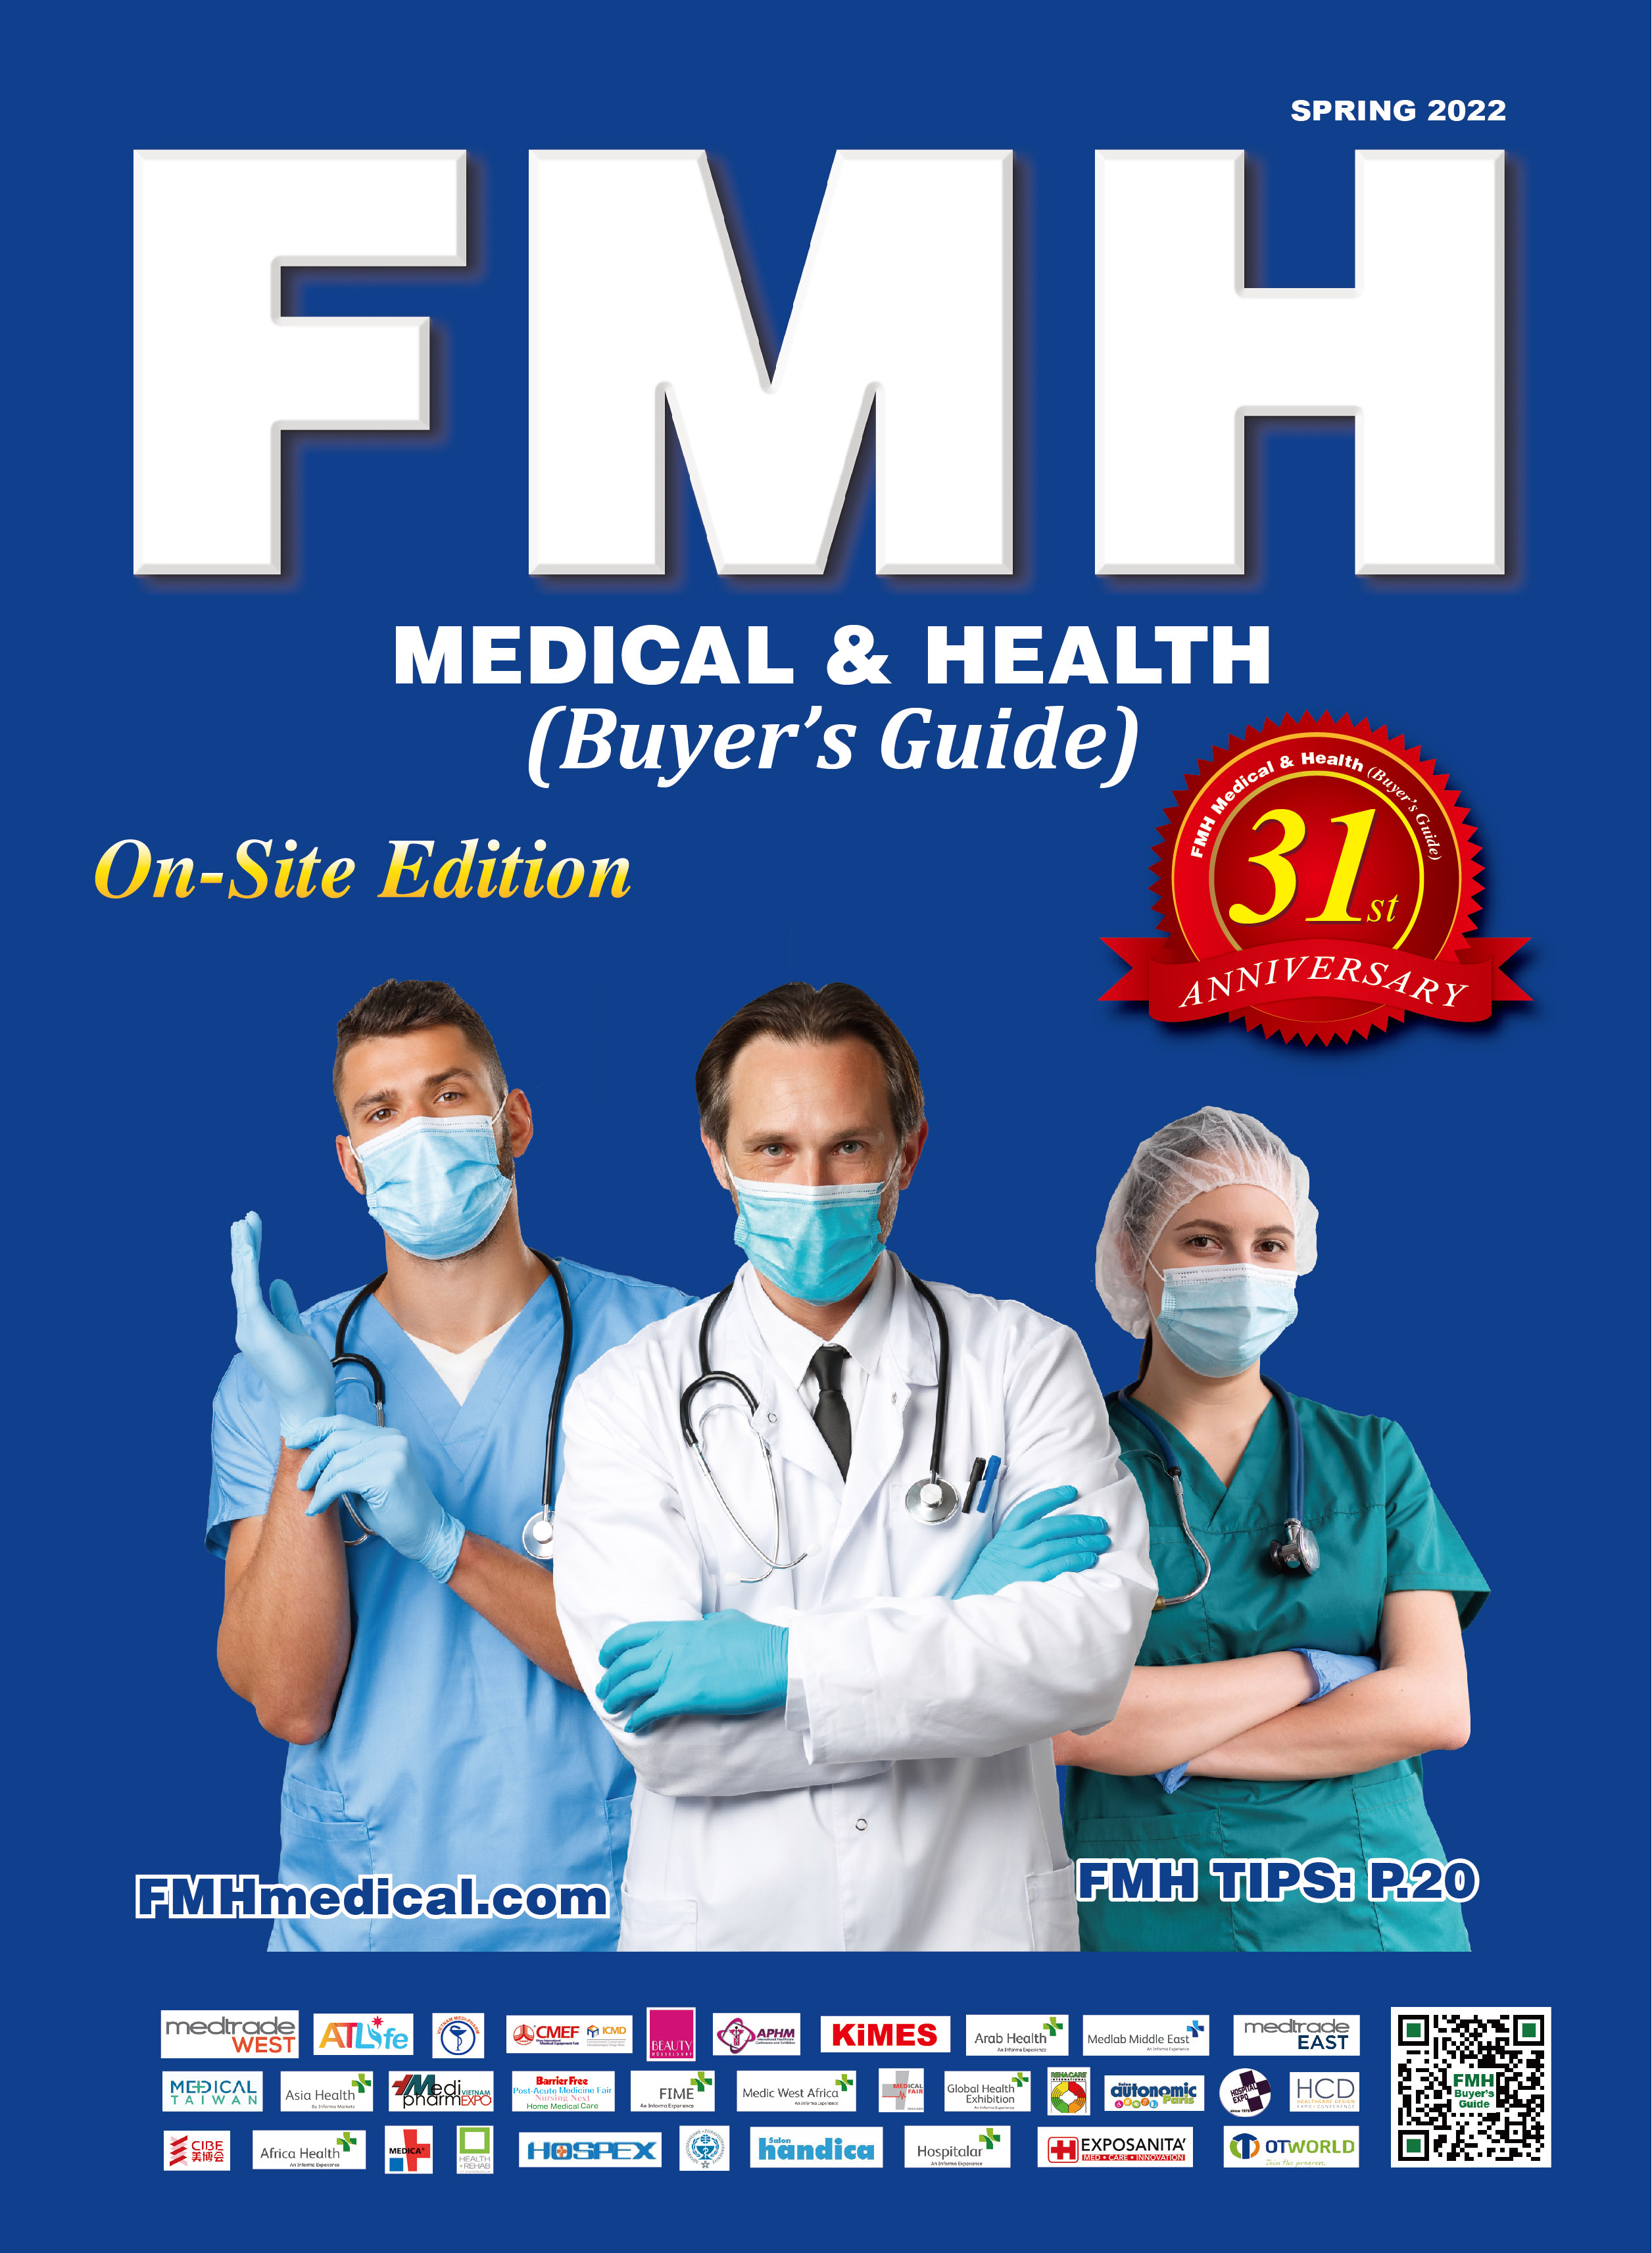 FMH 56 has been distributed onsite at Arab Health 2022